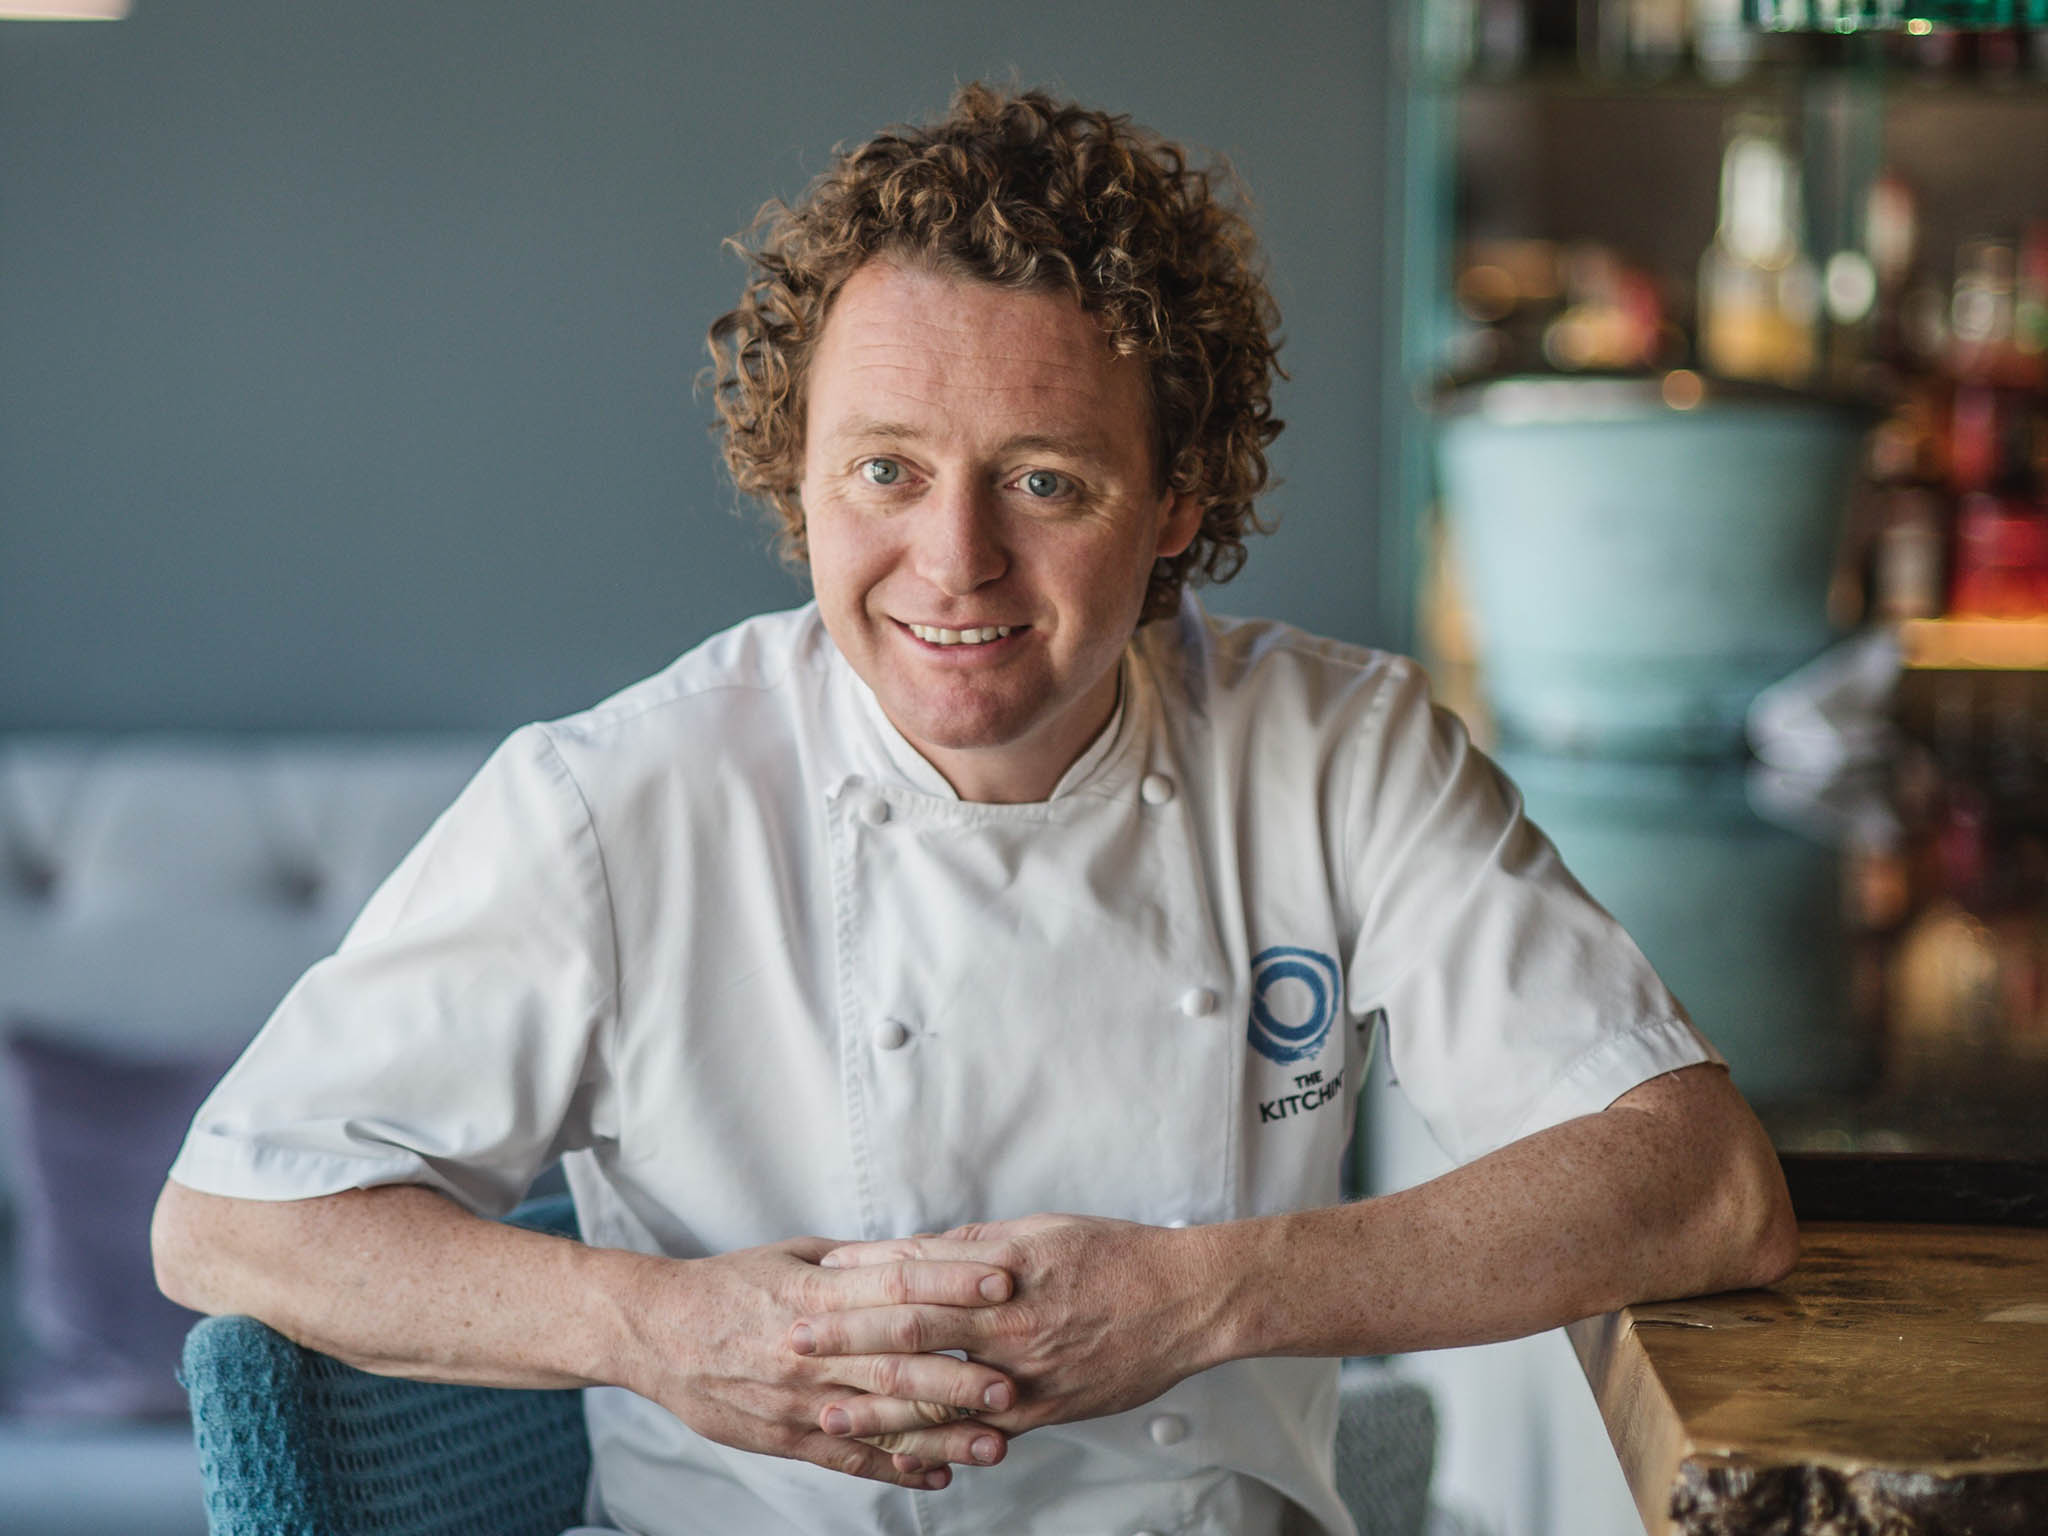 He's Scotland’s youngest Michelin starred chef proprietor, having achieved a star aged only 29